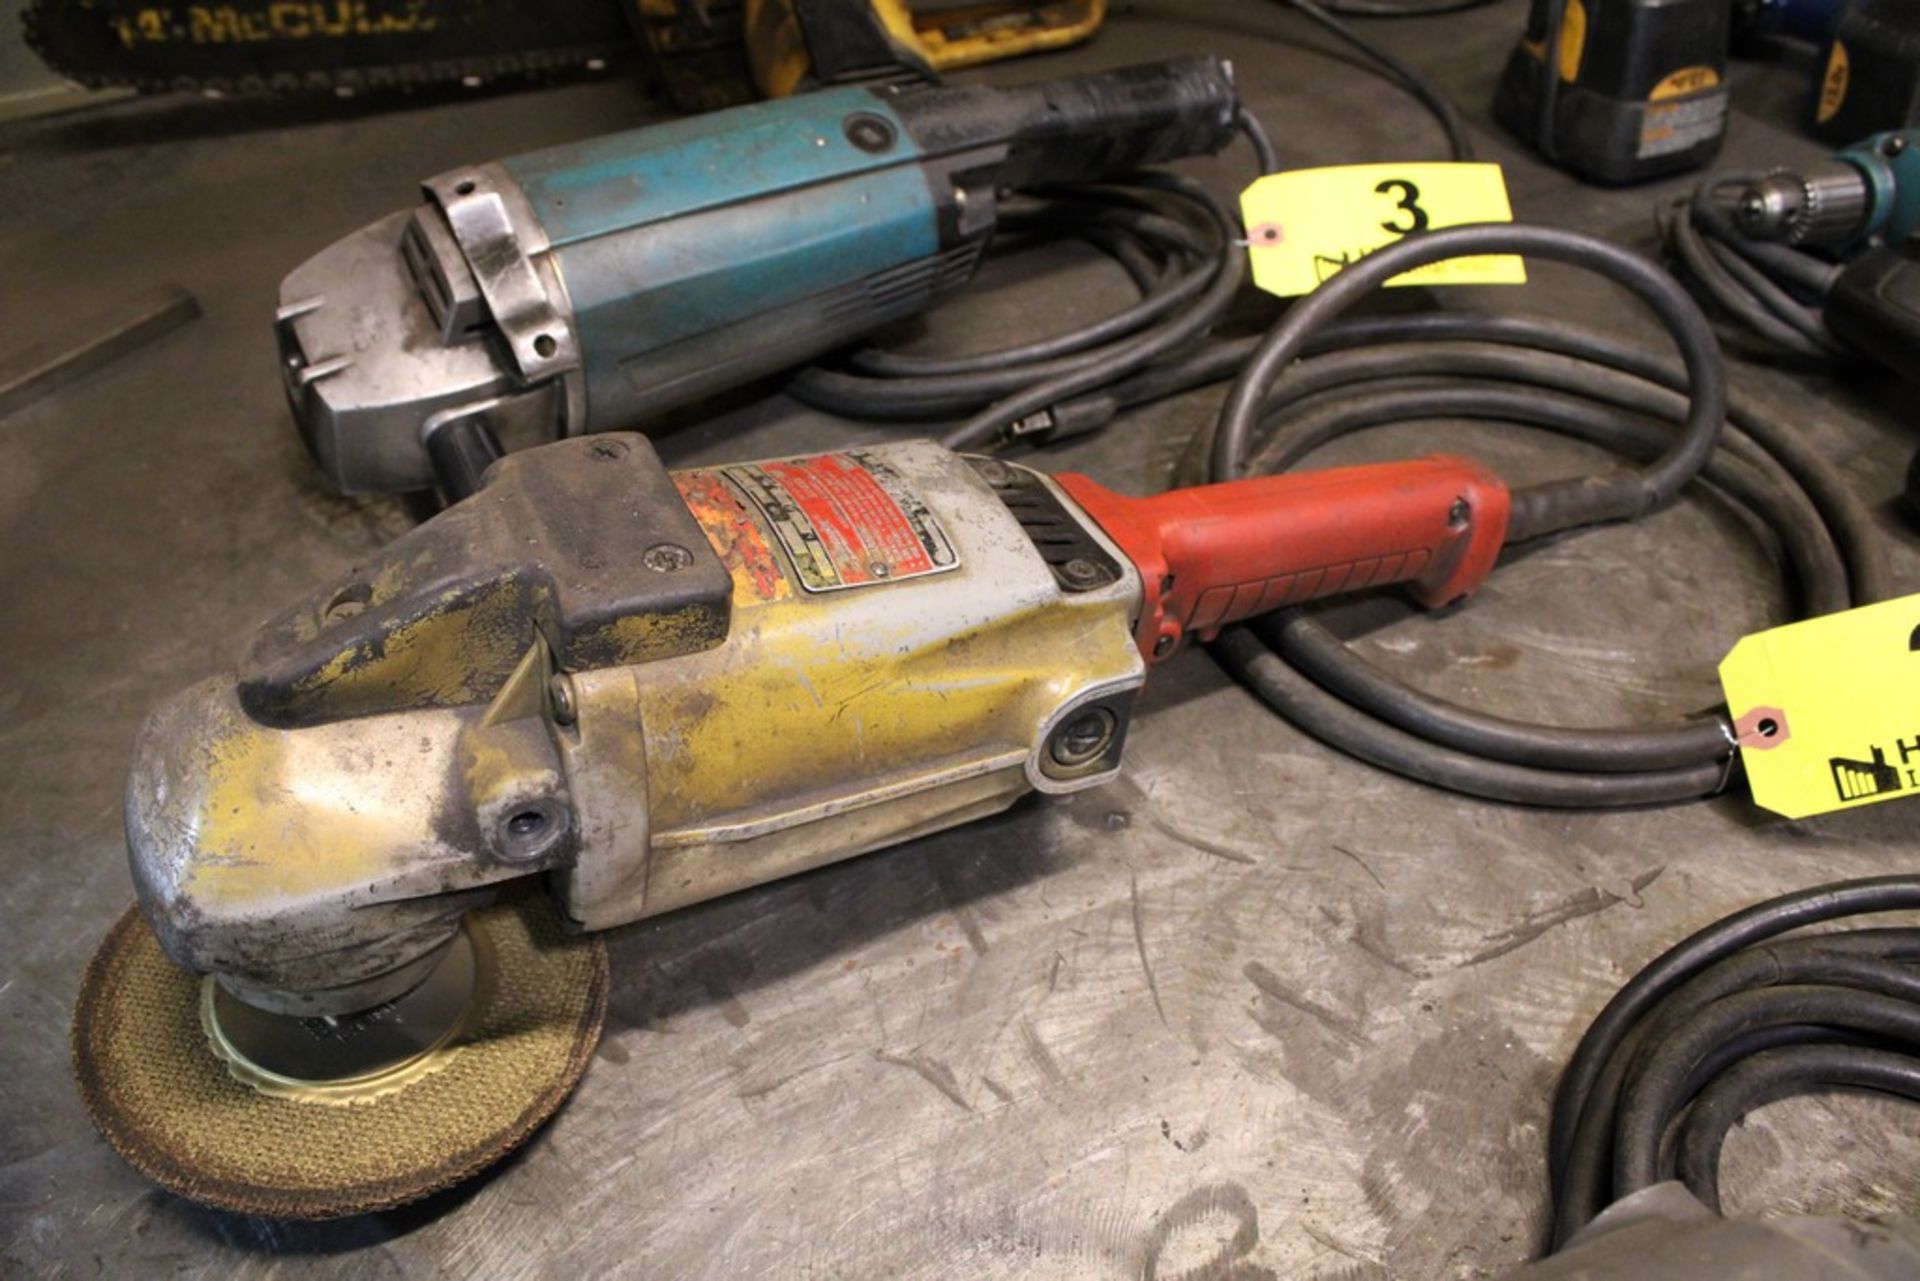 MILWUAKEE MODEL 6060 HEAVY DUTY 7" ANGLE GRINDER